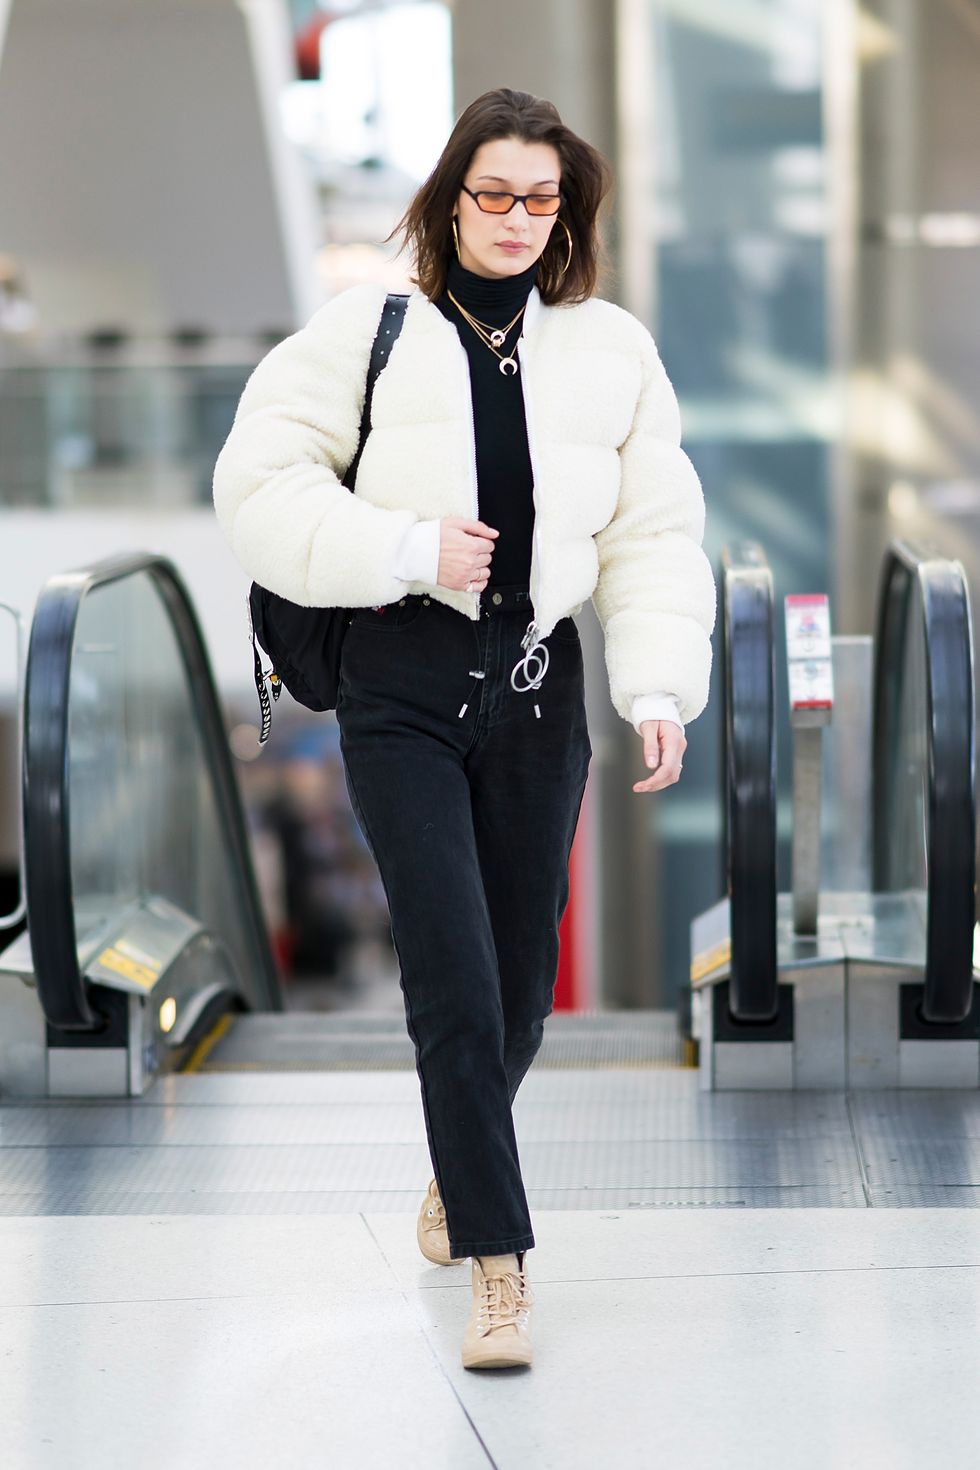 Style Inspo: The Best Airport Fashion Of 2019